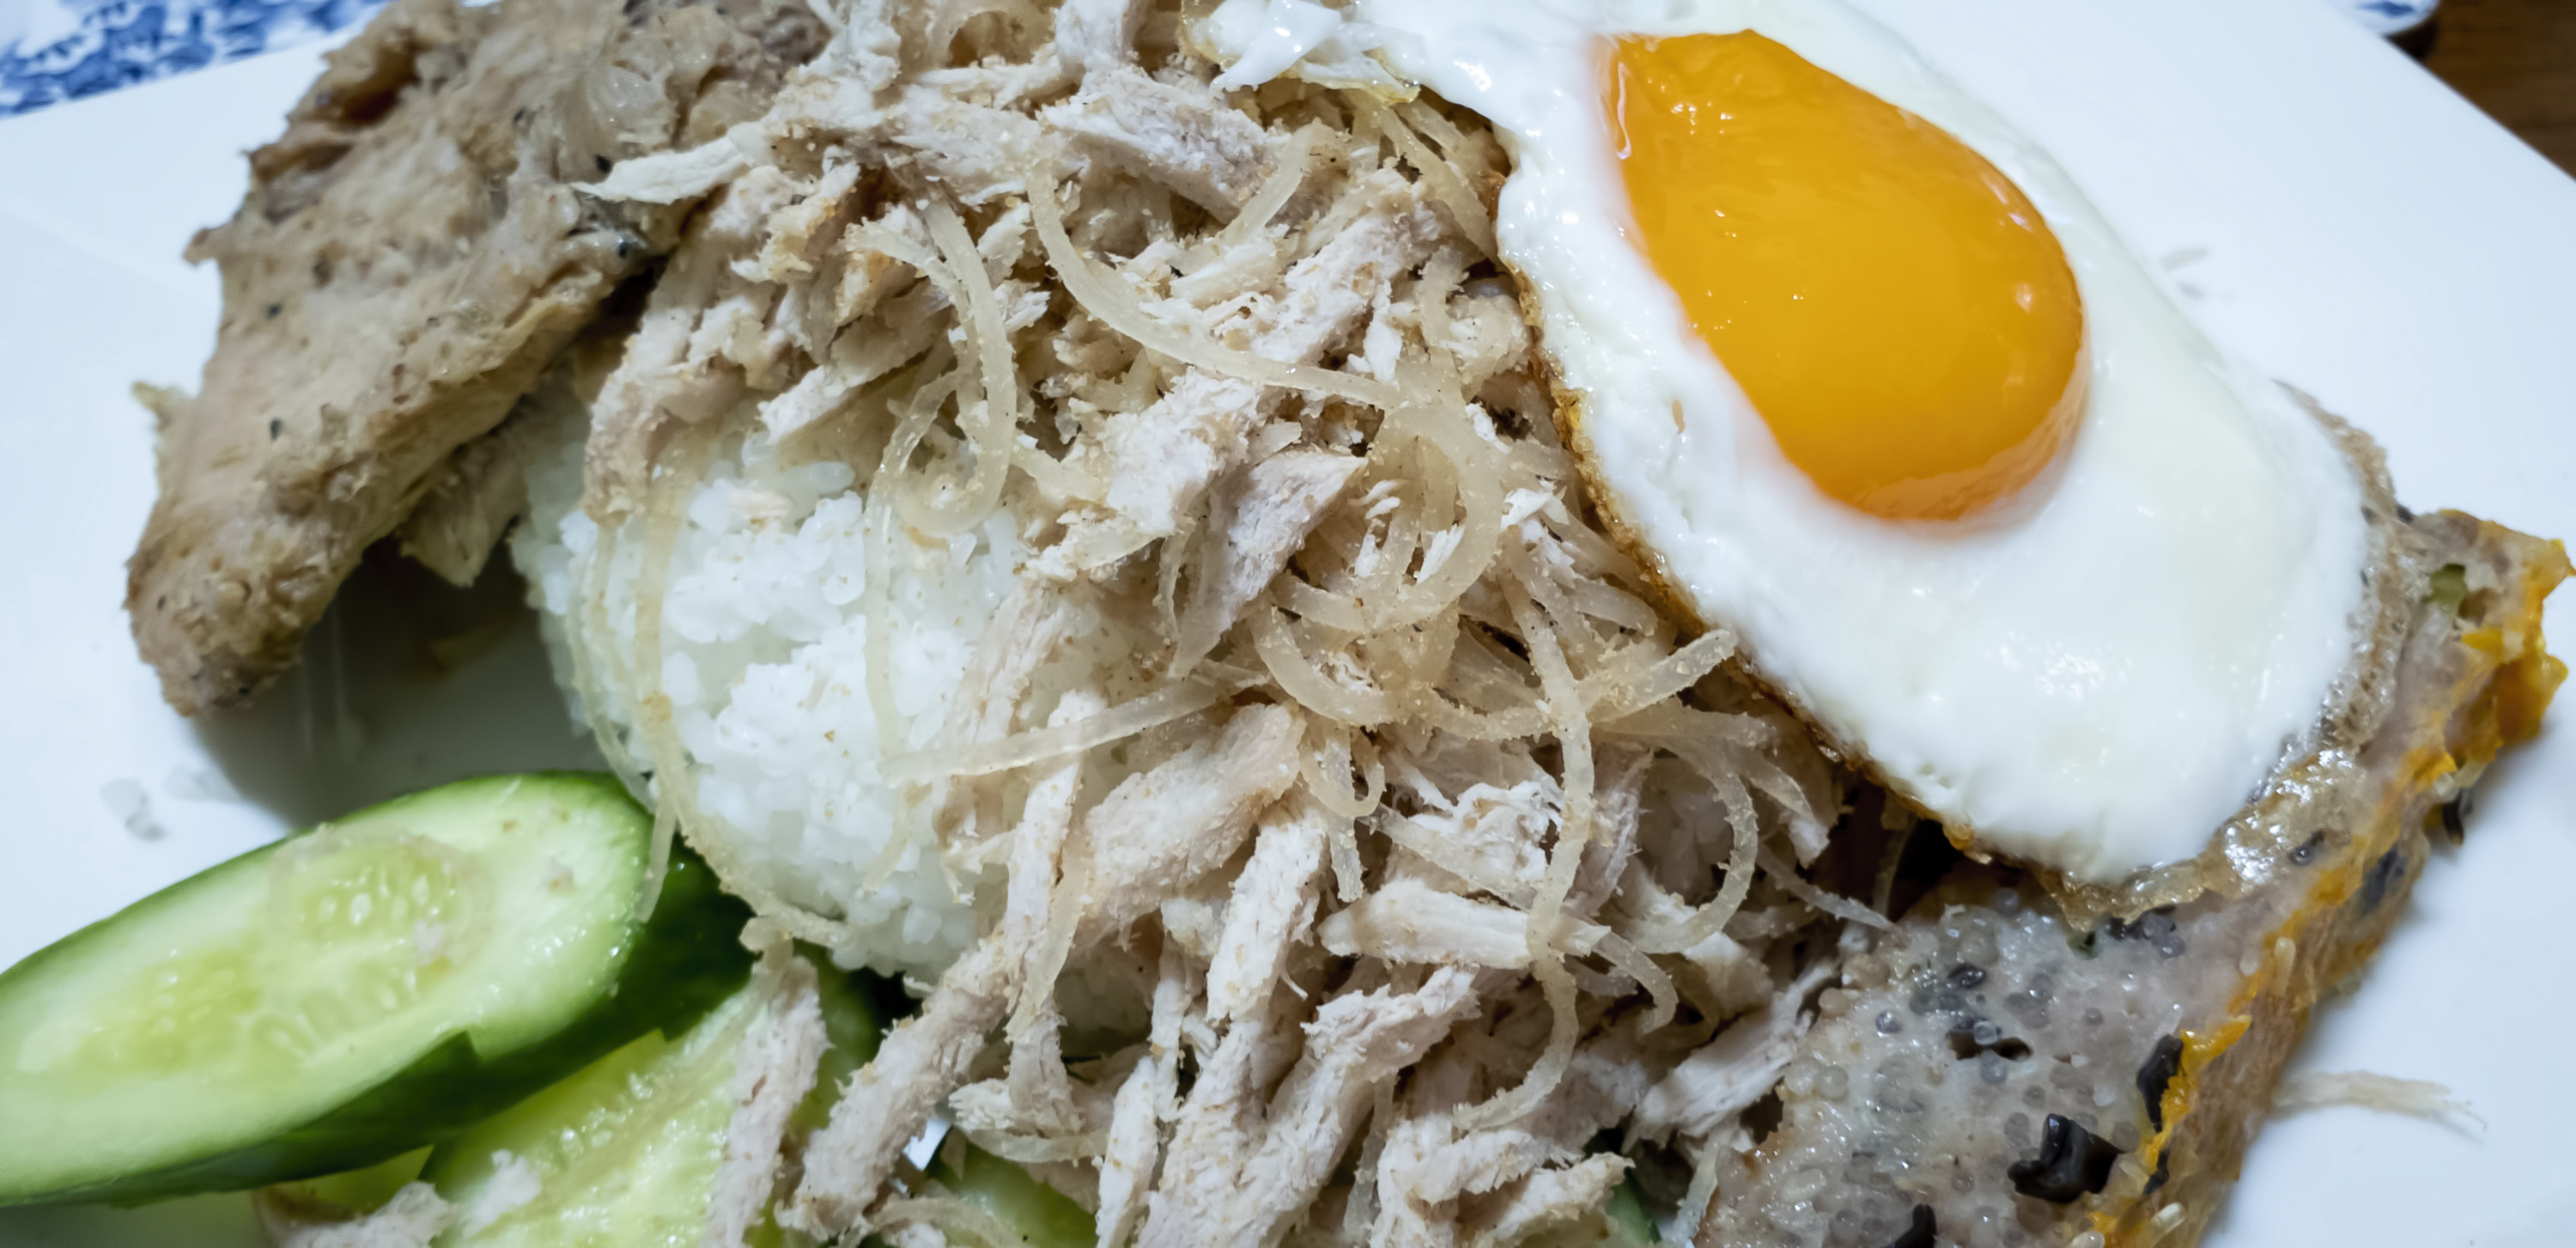 shredded meat and sunny side up egg over white rice